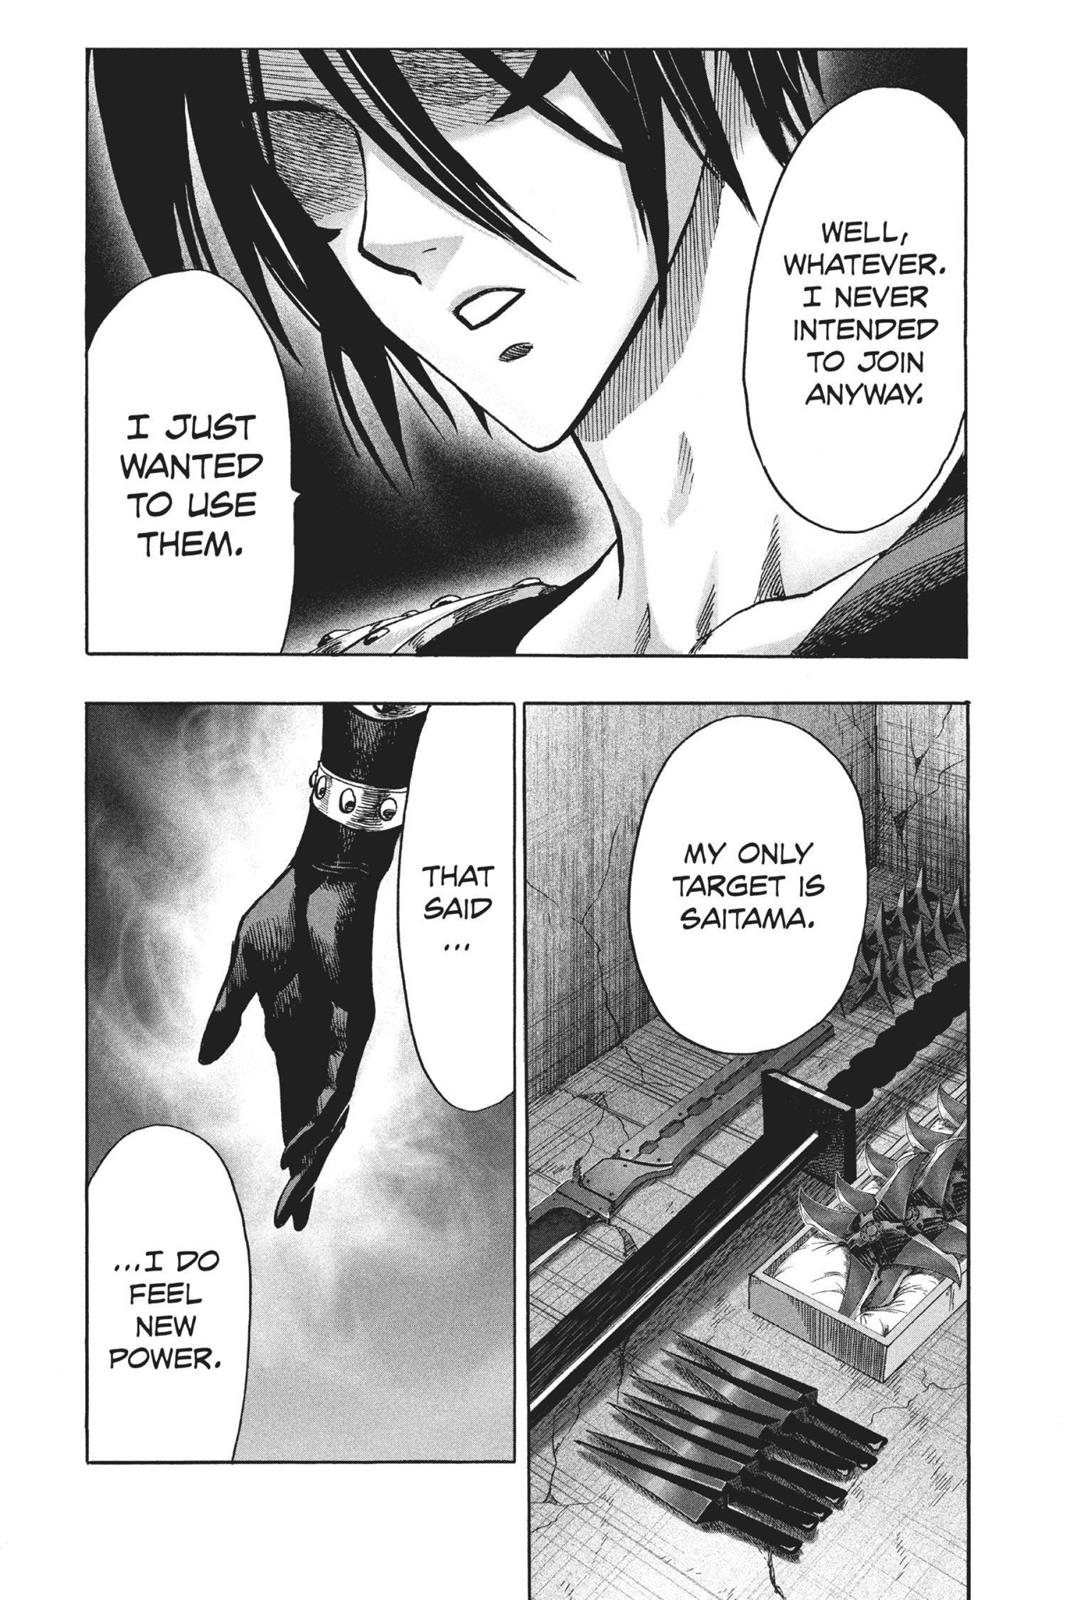 One-Punch Man, Punch 87 image 33